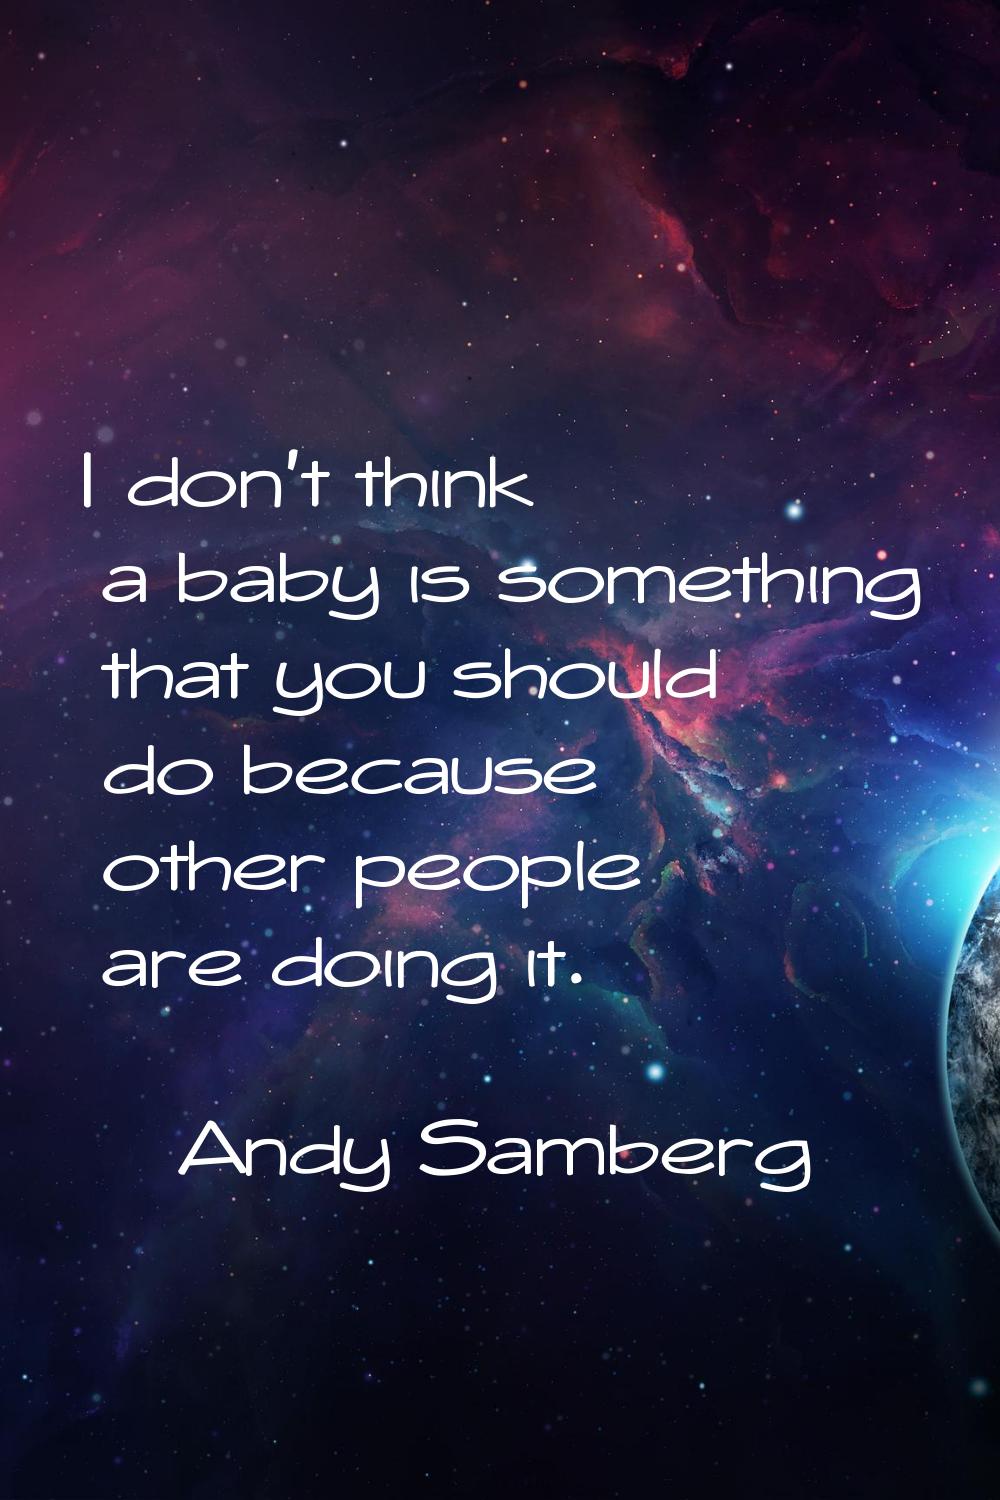 I don't think a baby is something that you should do because other people are doing it.